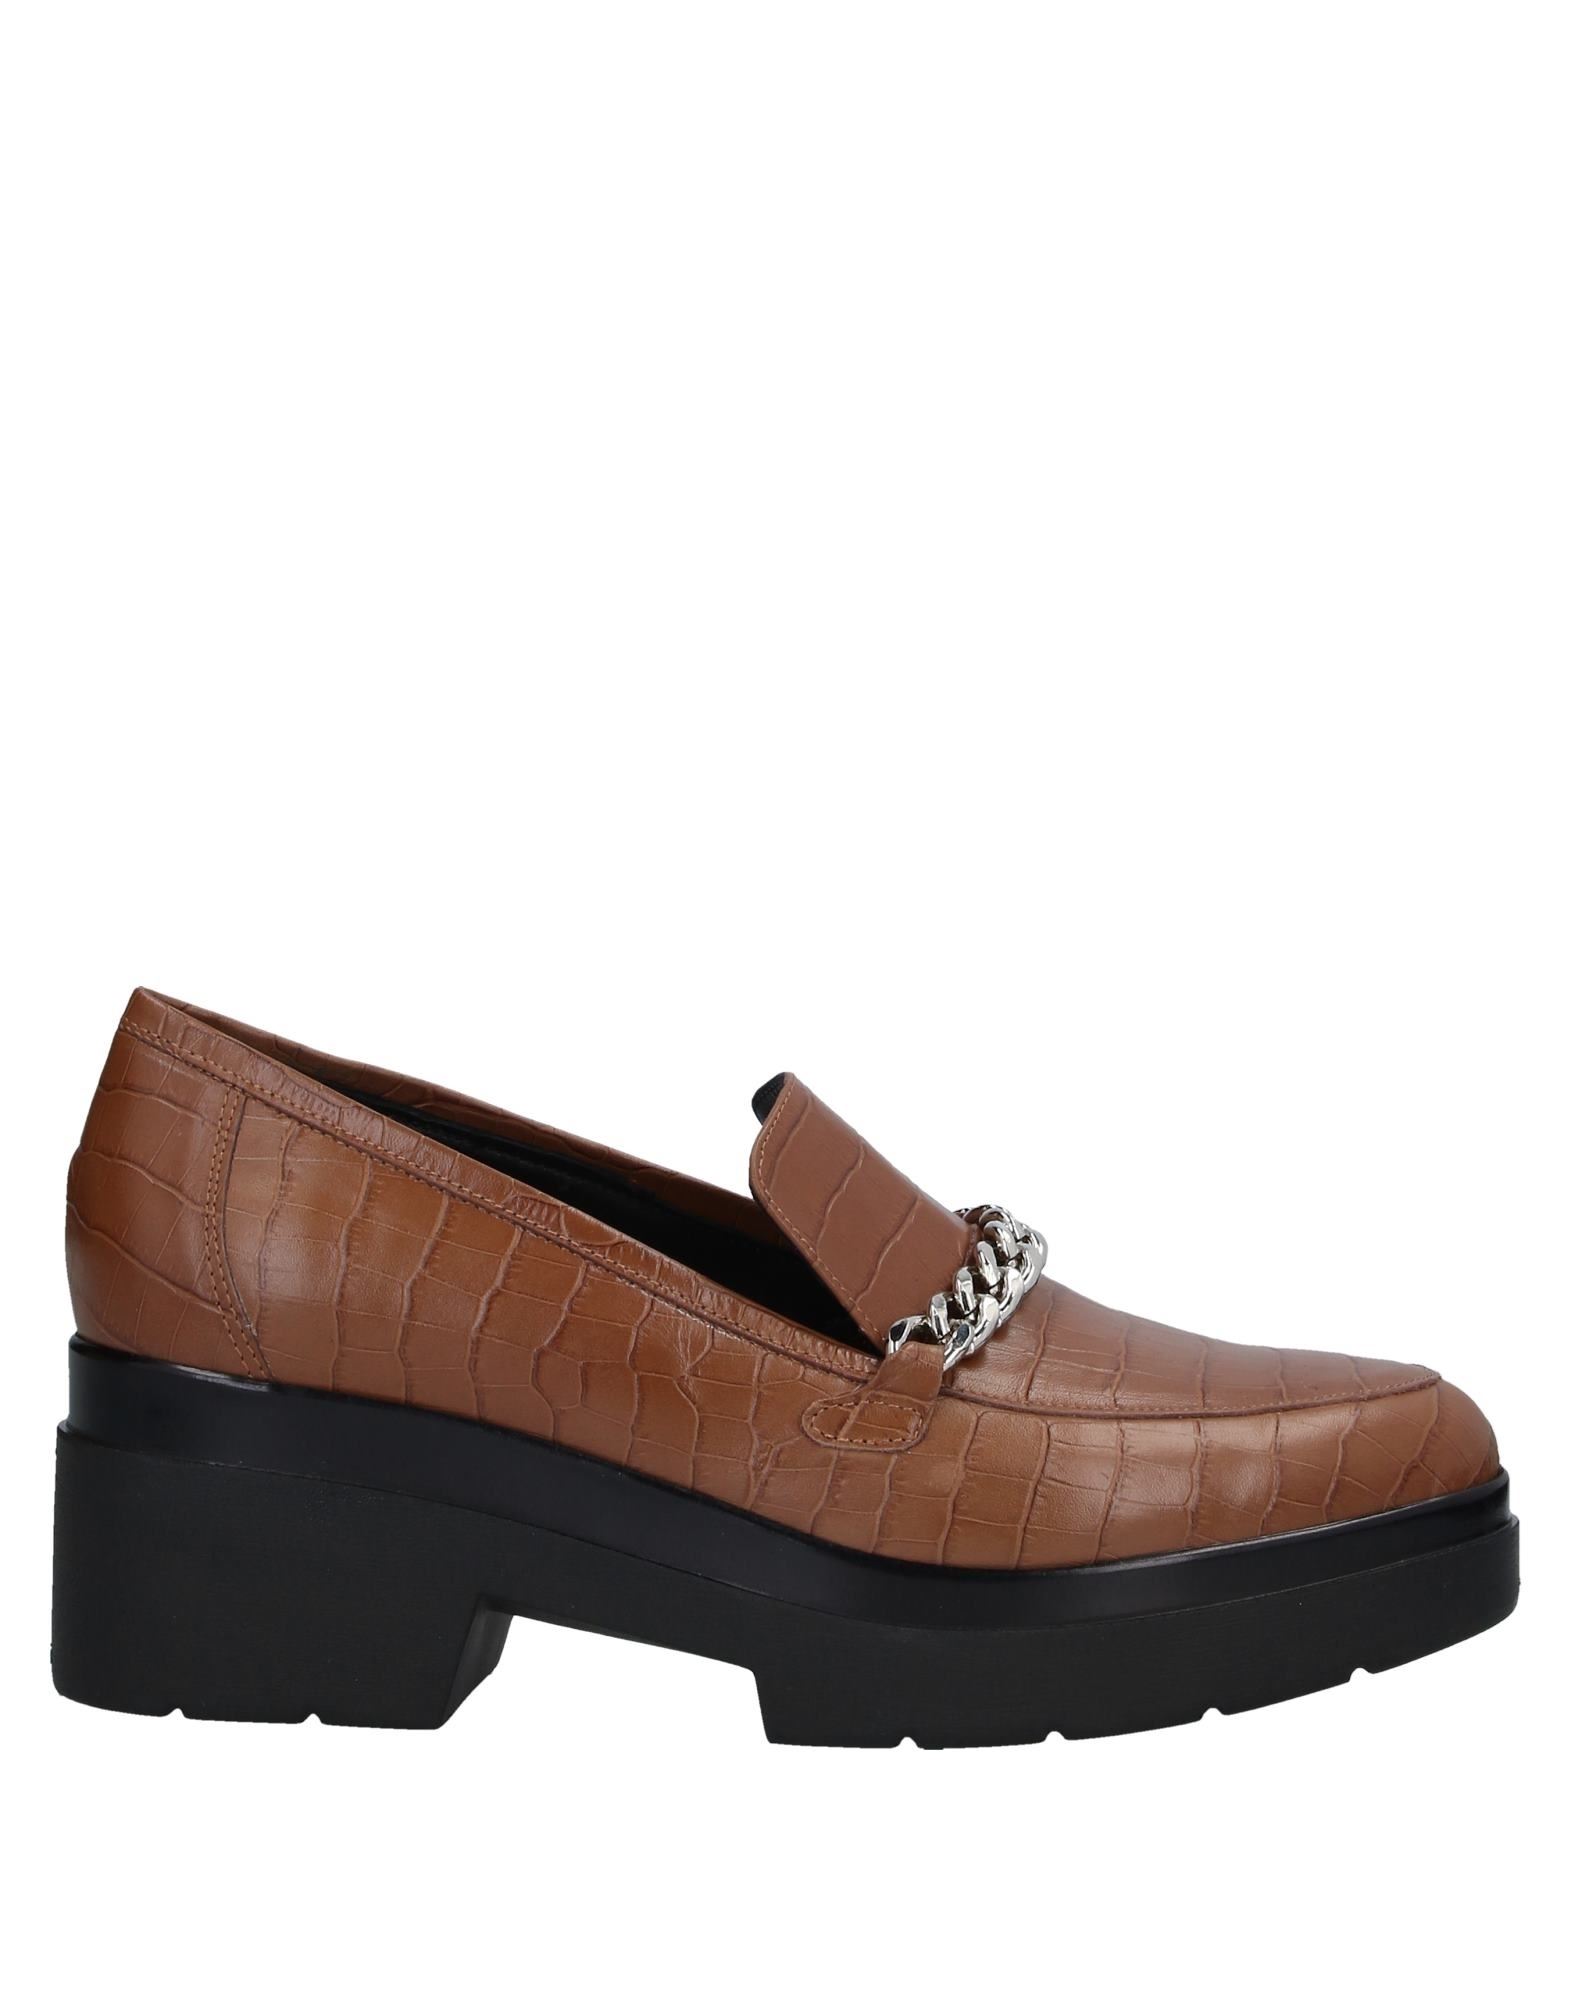 ANDREA PINTO Loafers